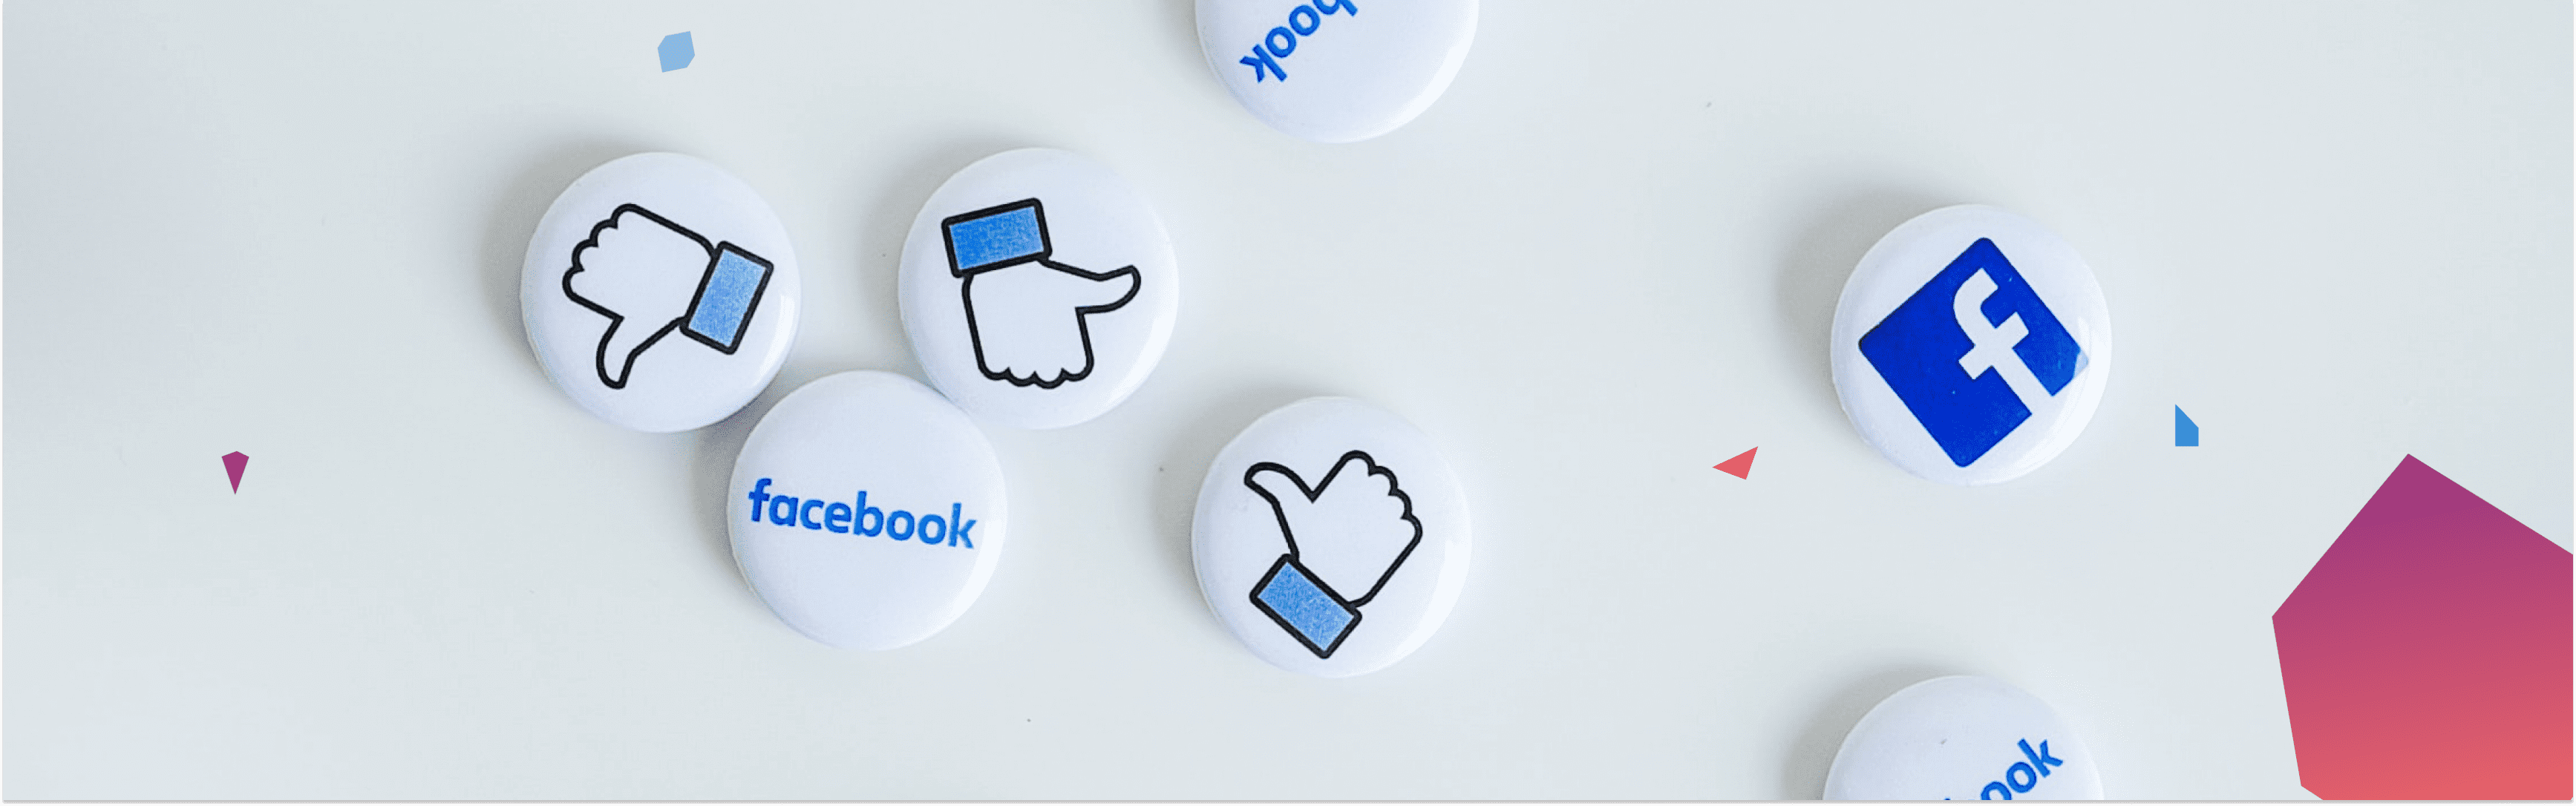 How to enable Facebook social login for my community on Bettermode